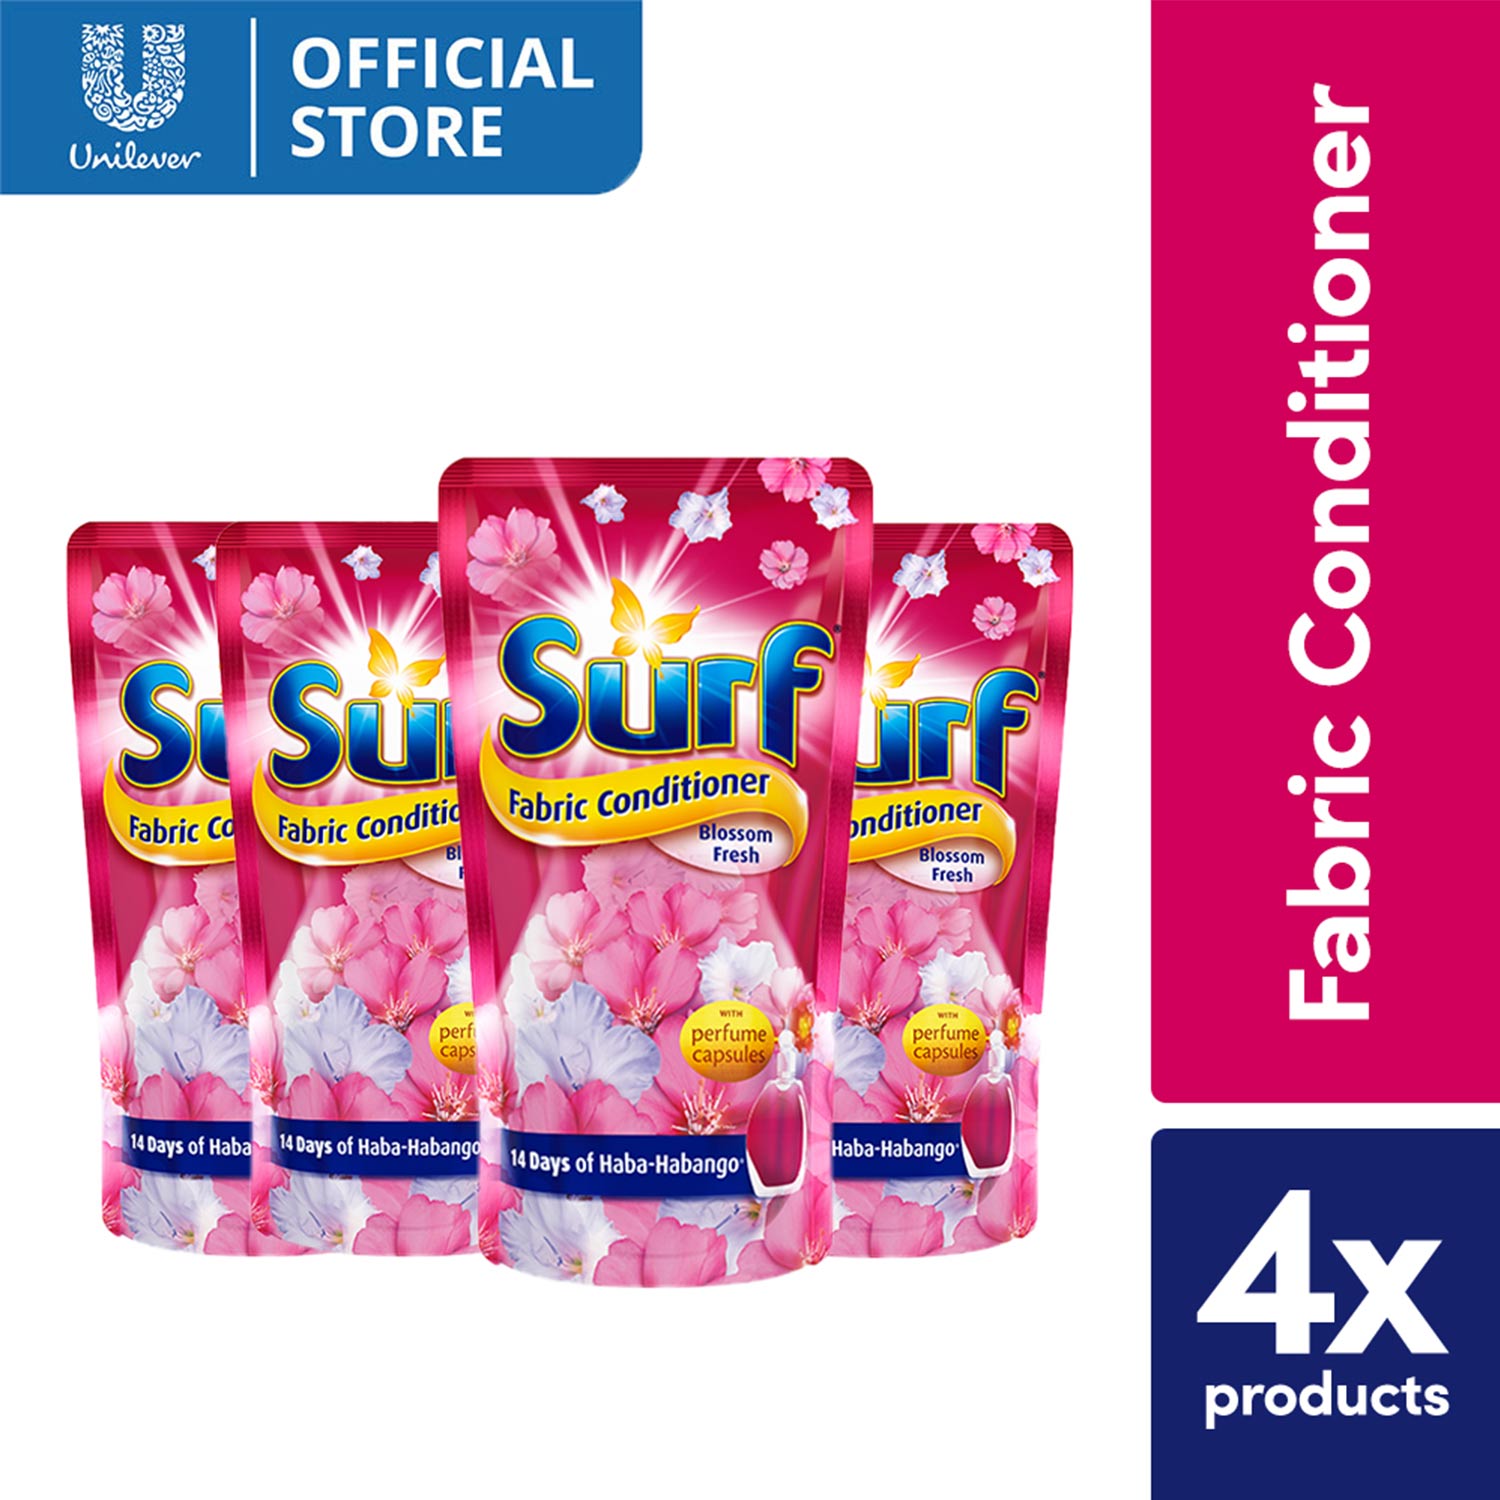 Surf Laundry Fabric Conditioner Blossom Fresh 670ml Pouch 4x